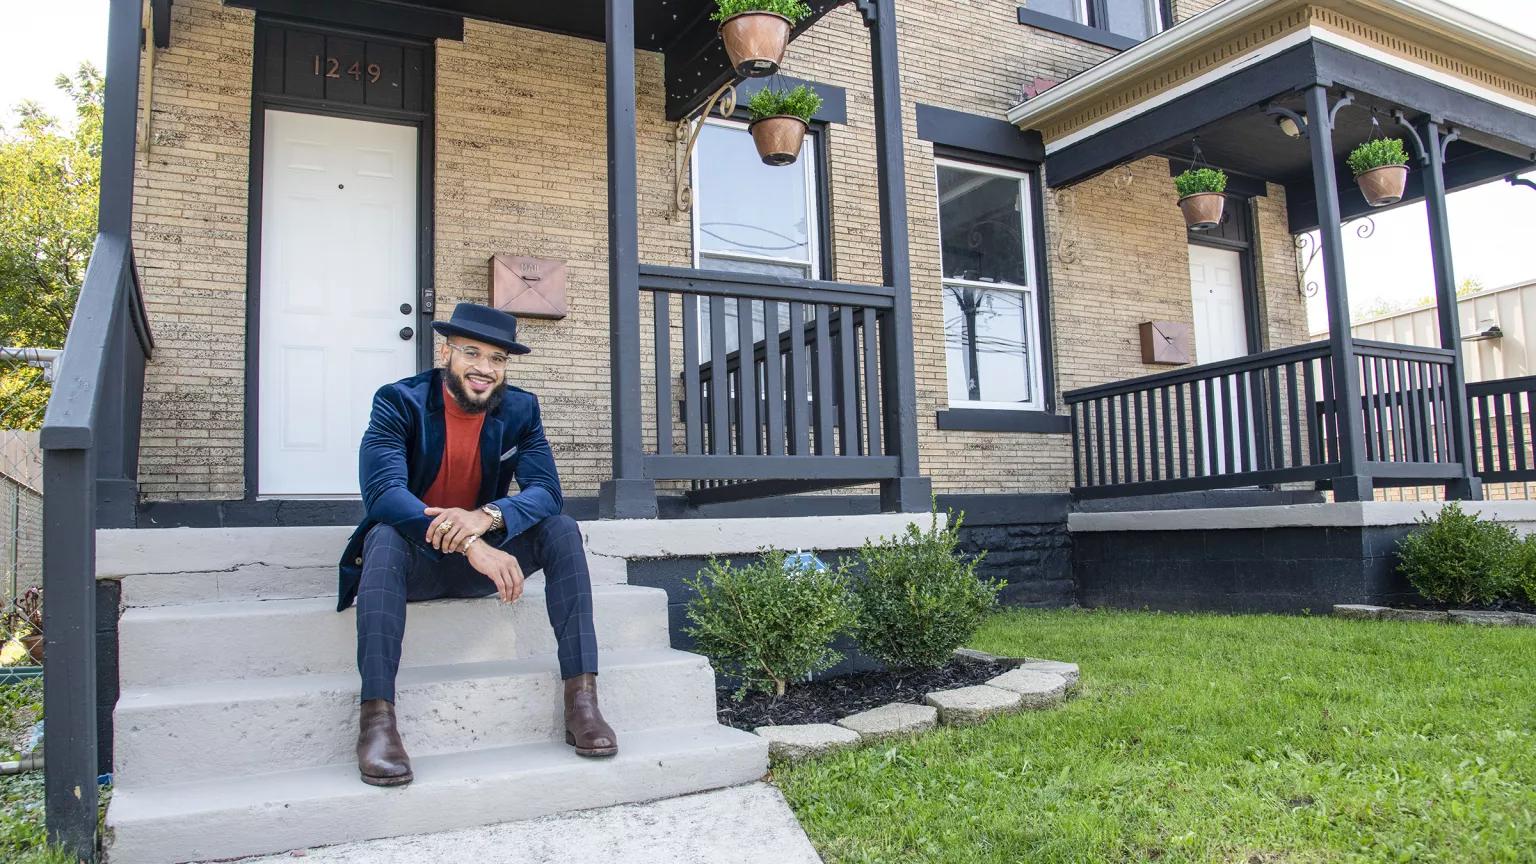 Elijah Carter, born and raised in Columbus’s Olde Towne East, recently solidified his commitment to and investment in his community by purchasing a home there.